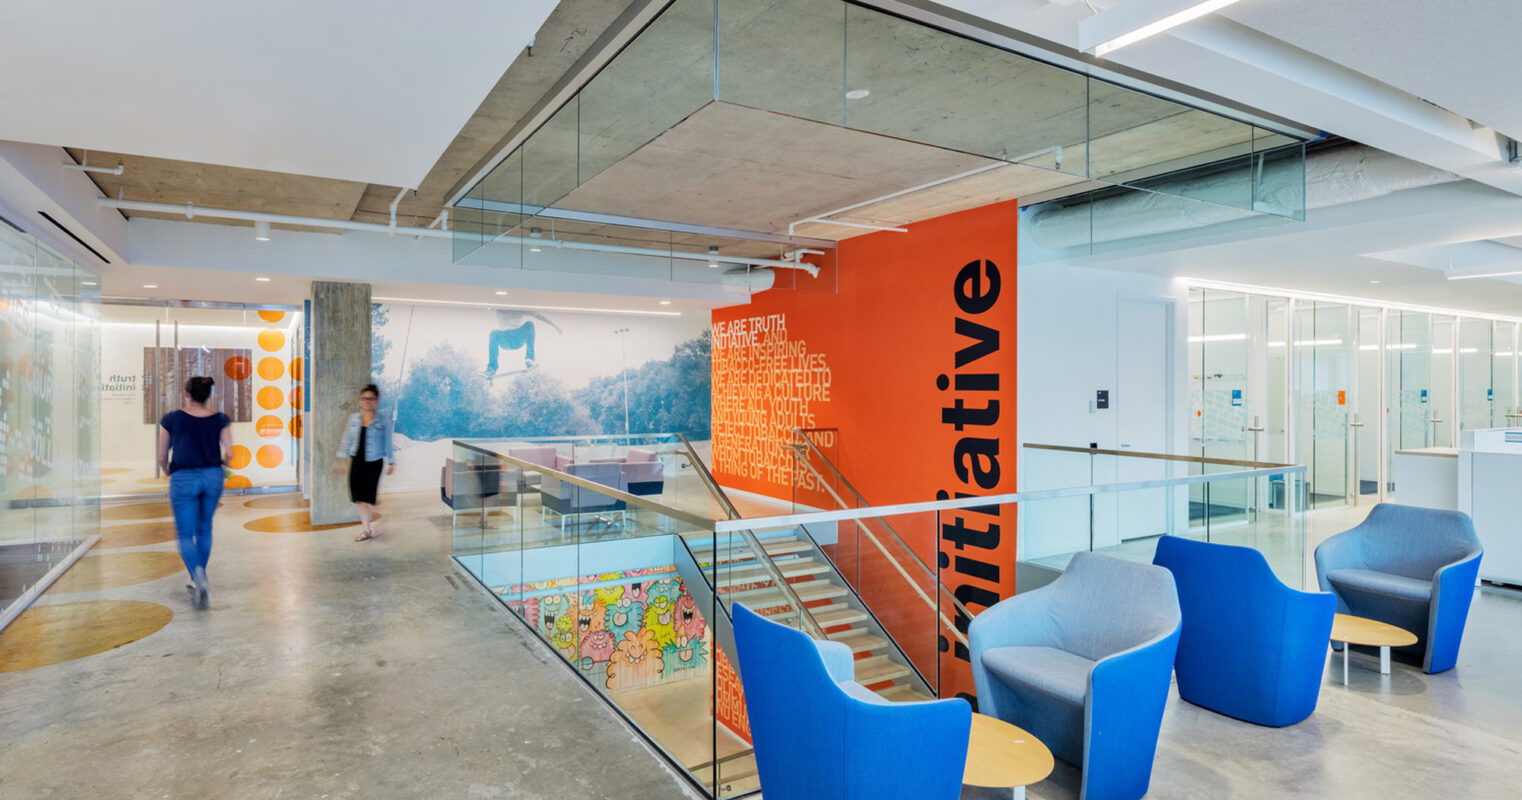 Modern office lobby with vibrant orange accent wall featuring typographic art, complemented by sleek glass stair railing. Blue upholstered armchairs add a pop of color, set against the crisp white walls and polished concrete floor. Natural light enhances the space's open, airy ambiance.